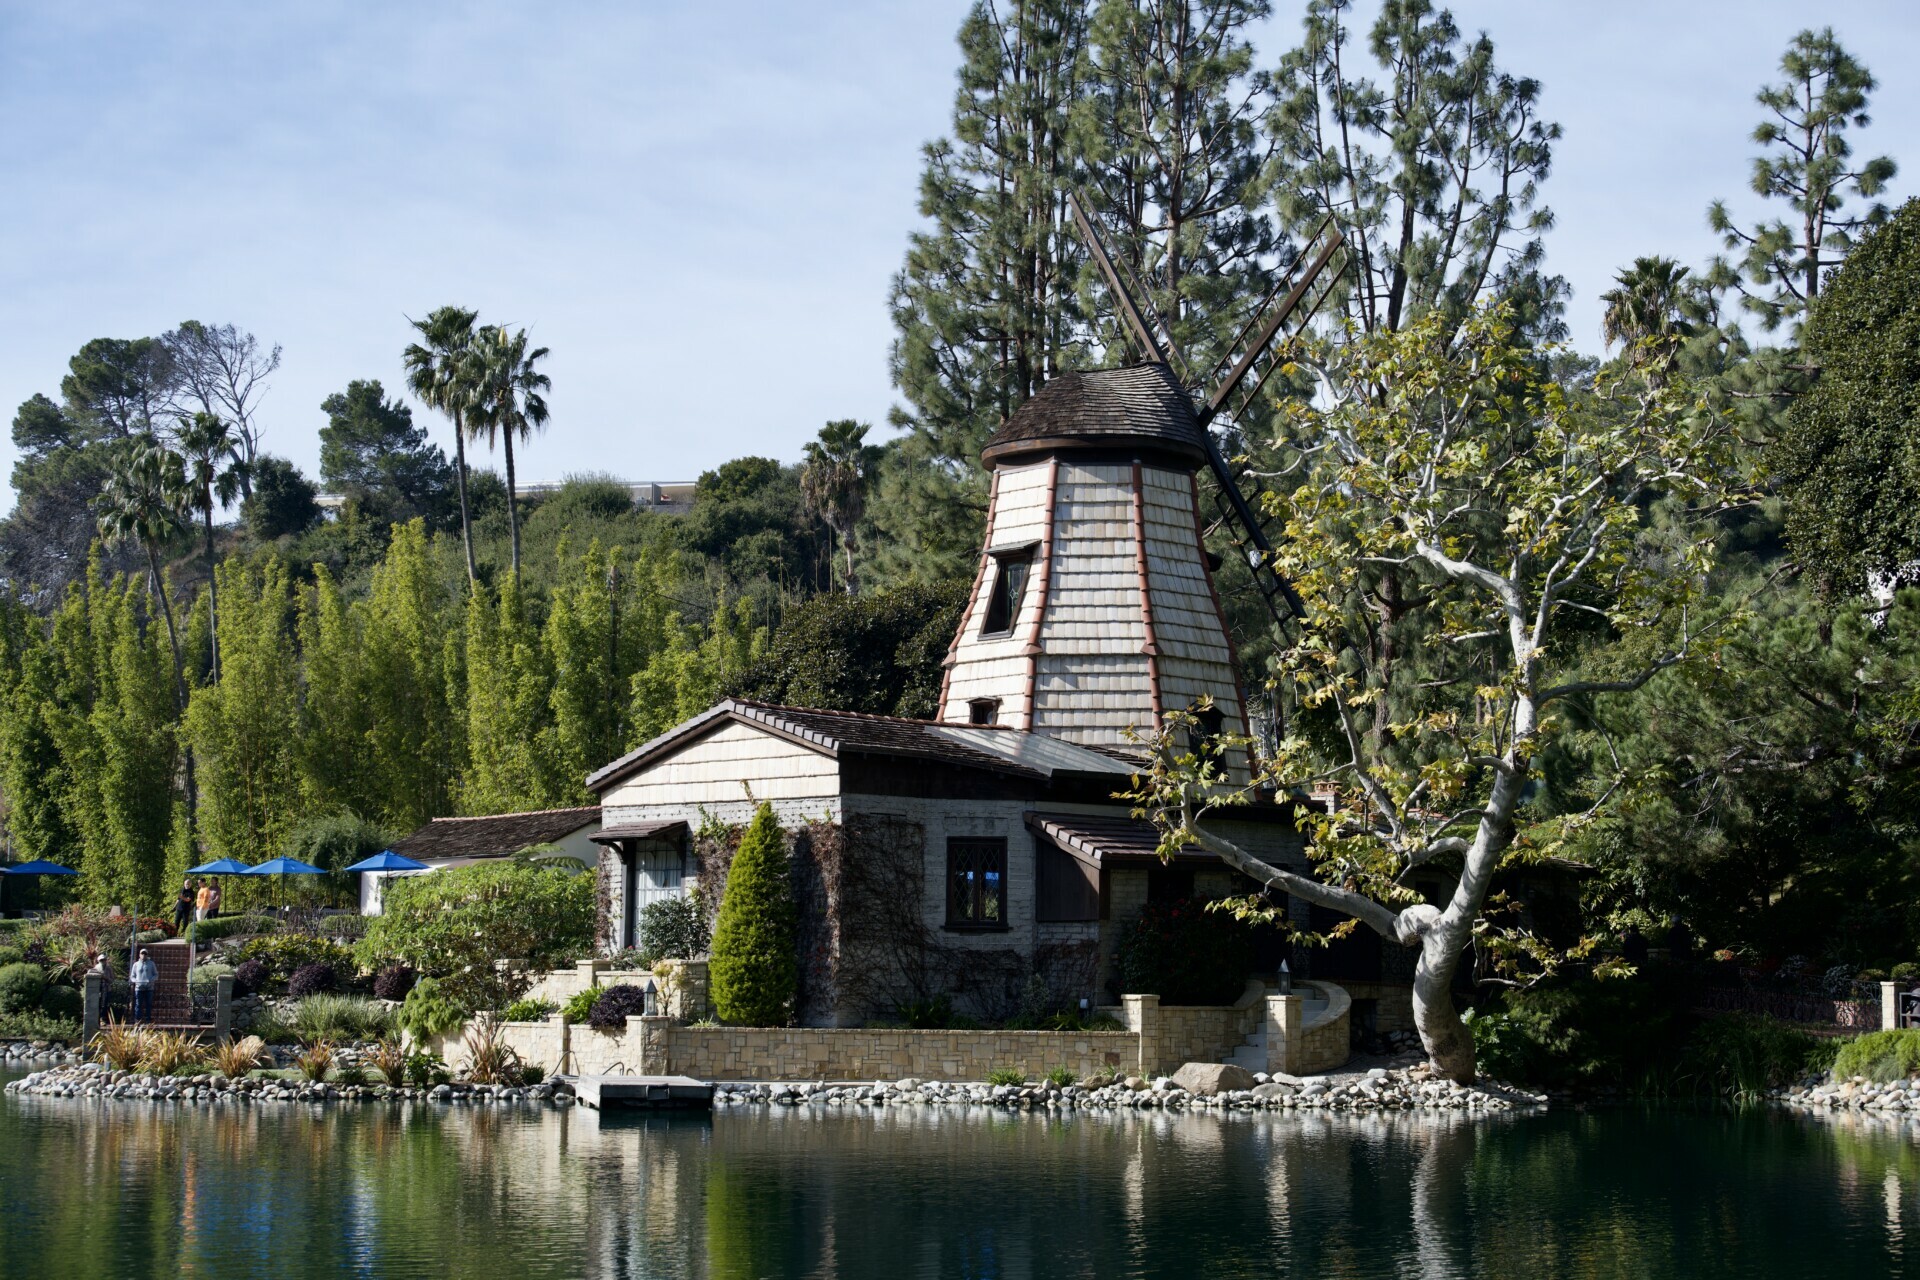 A rustic windmill overlooking Shrine Lake, surrounded by vibrant greenery under the clear Los Angeles sky